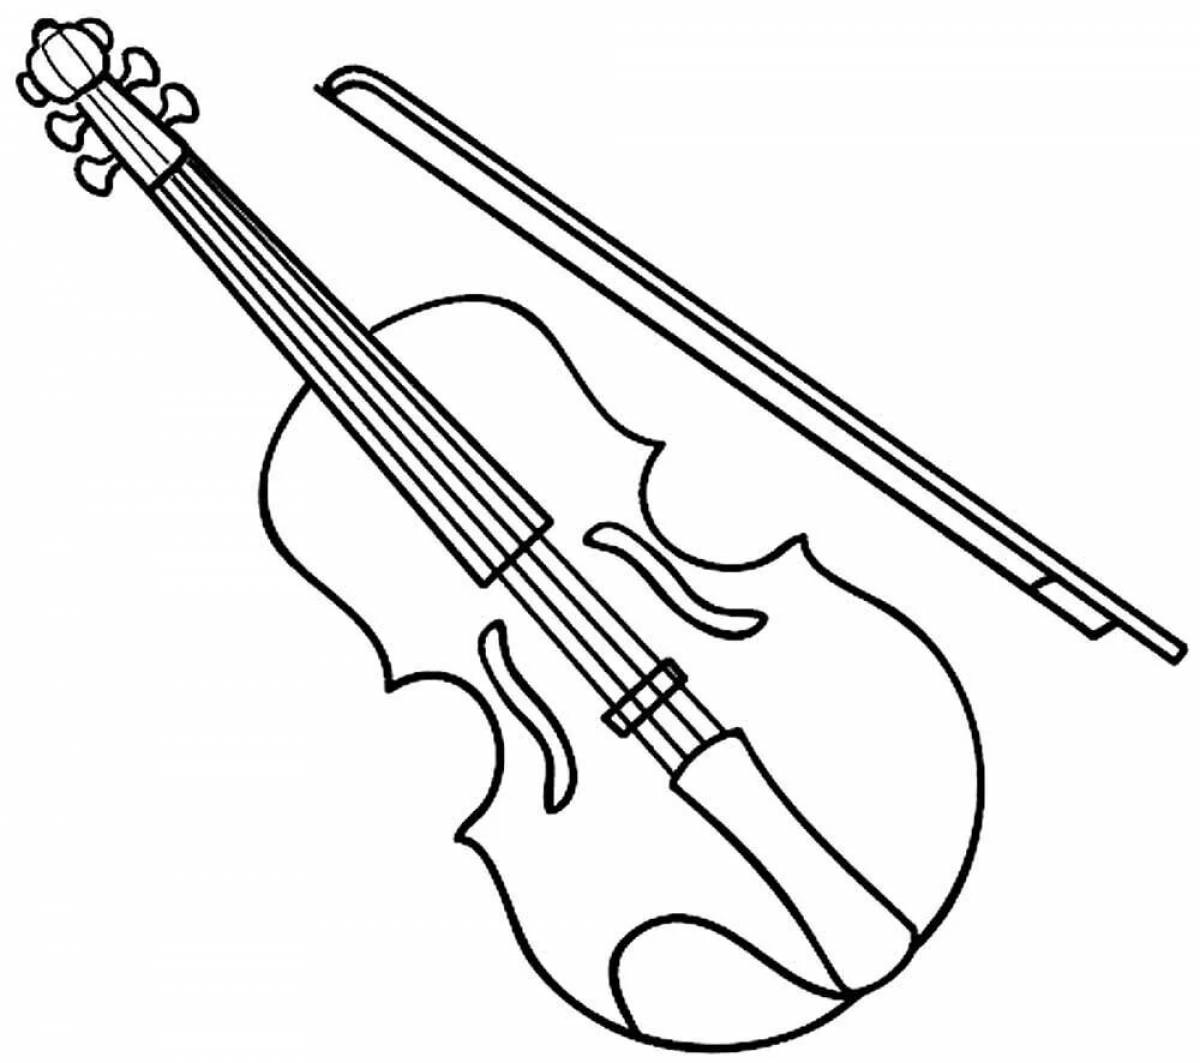 Adorable violin coloring page for kids